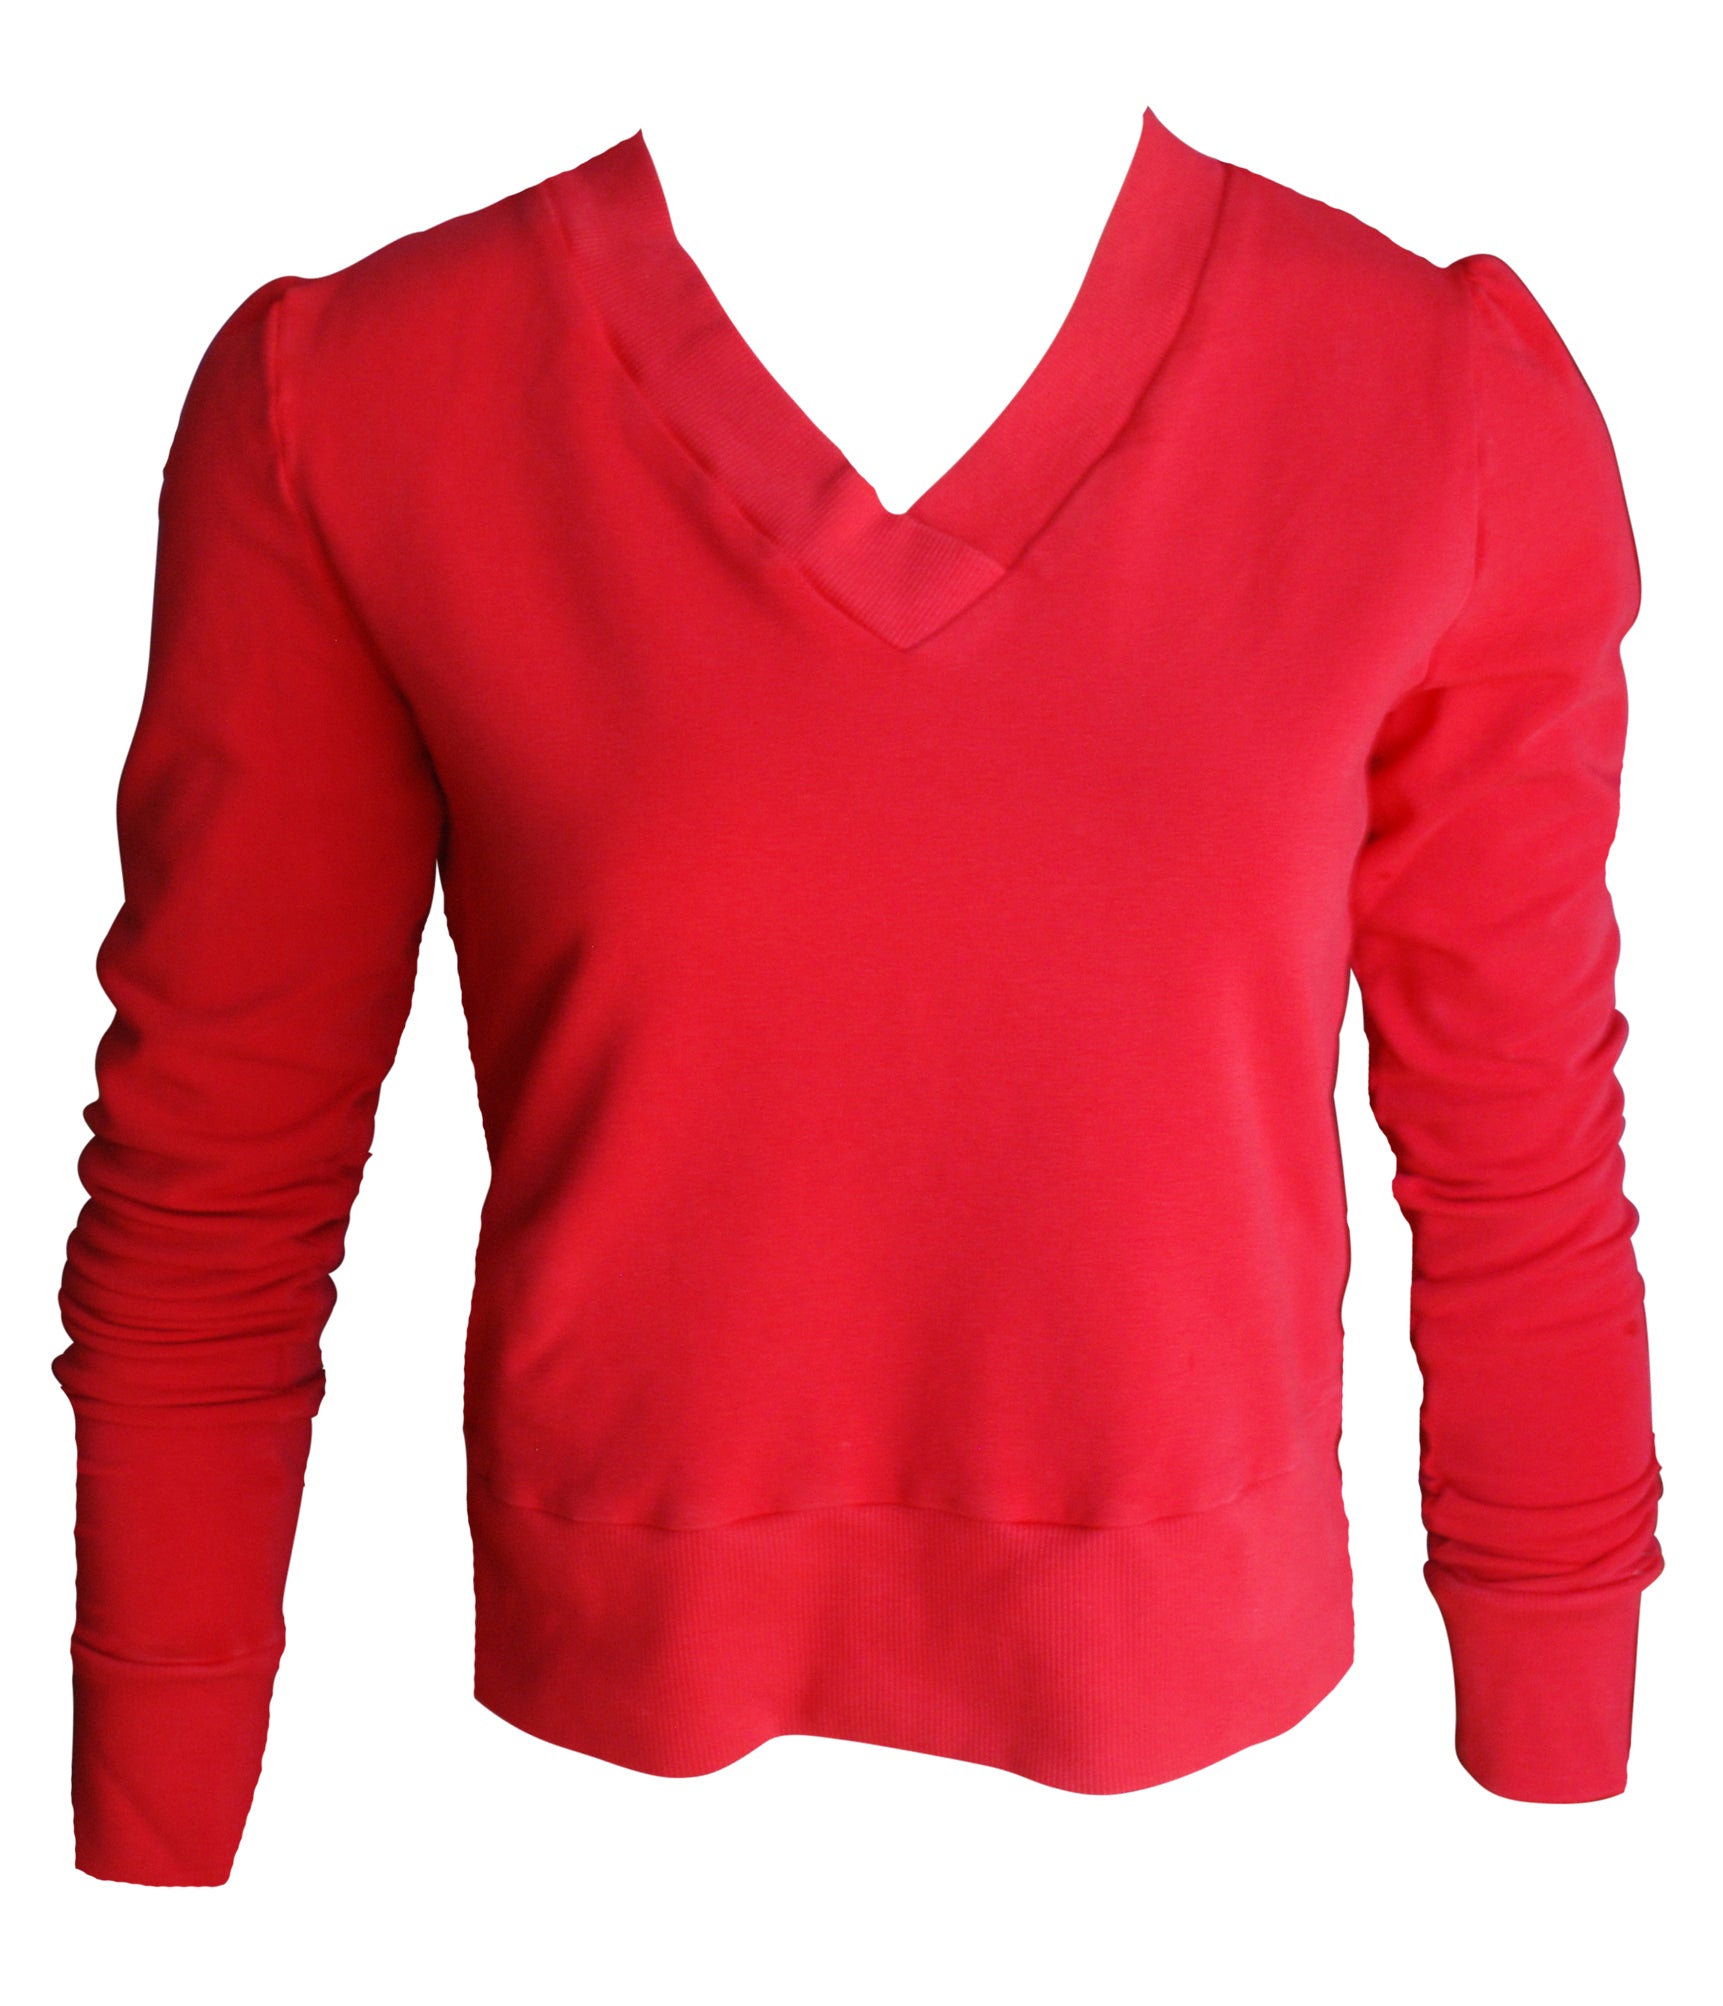 Red v-neck French terry top with rib trim